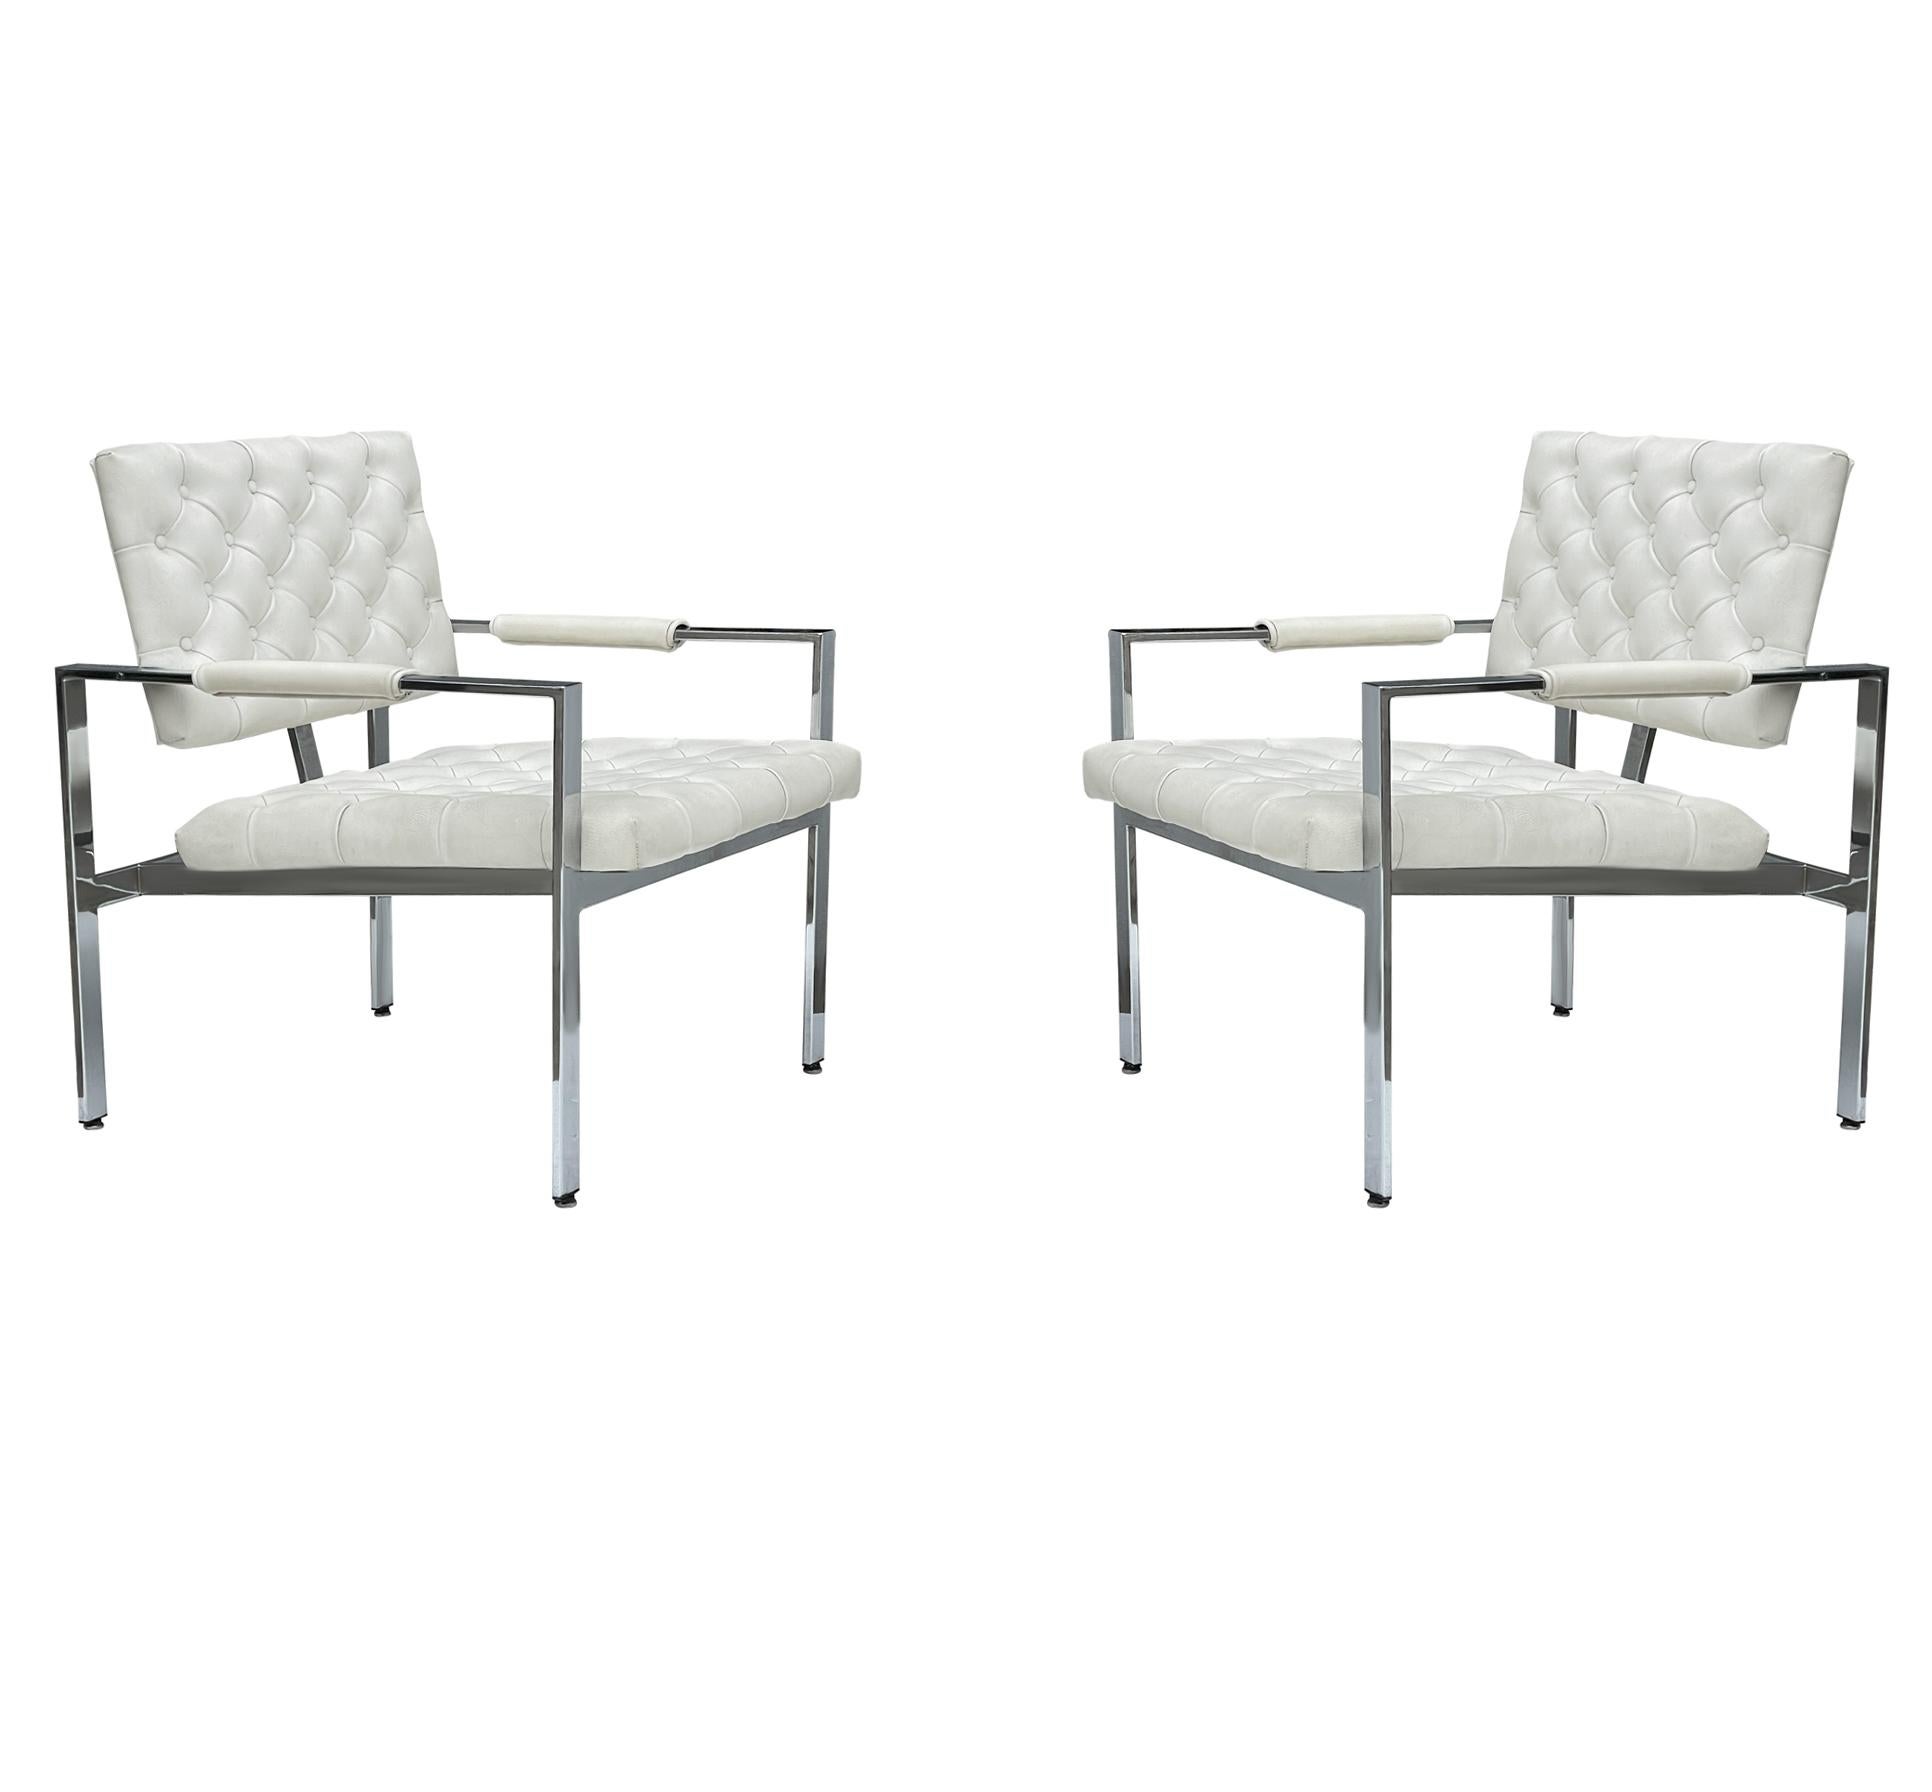 Pair Mid-Century Modern Chrome & White Tufted Lounge Chairs After Harvey Probber For Sale 4